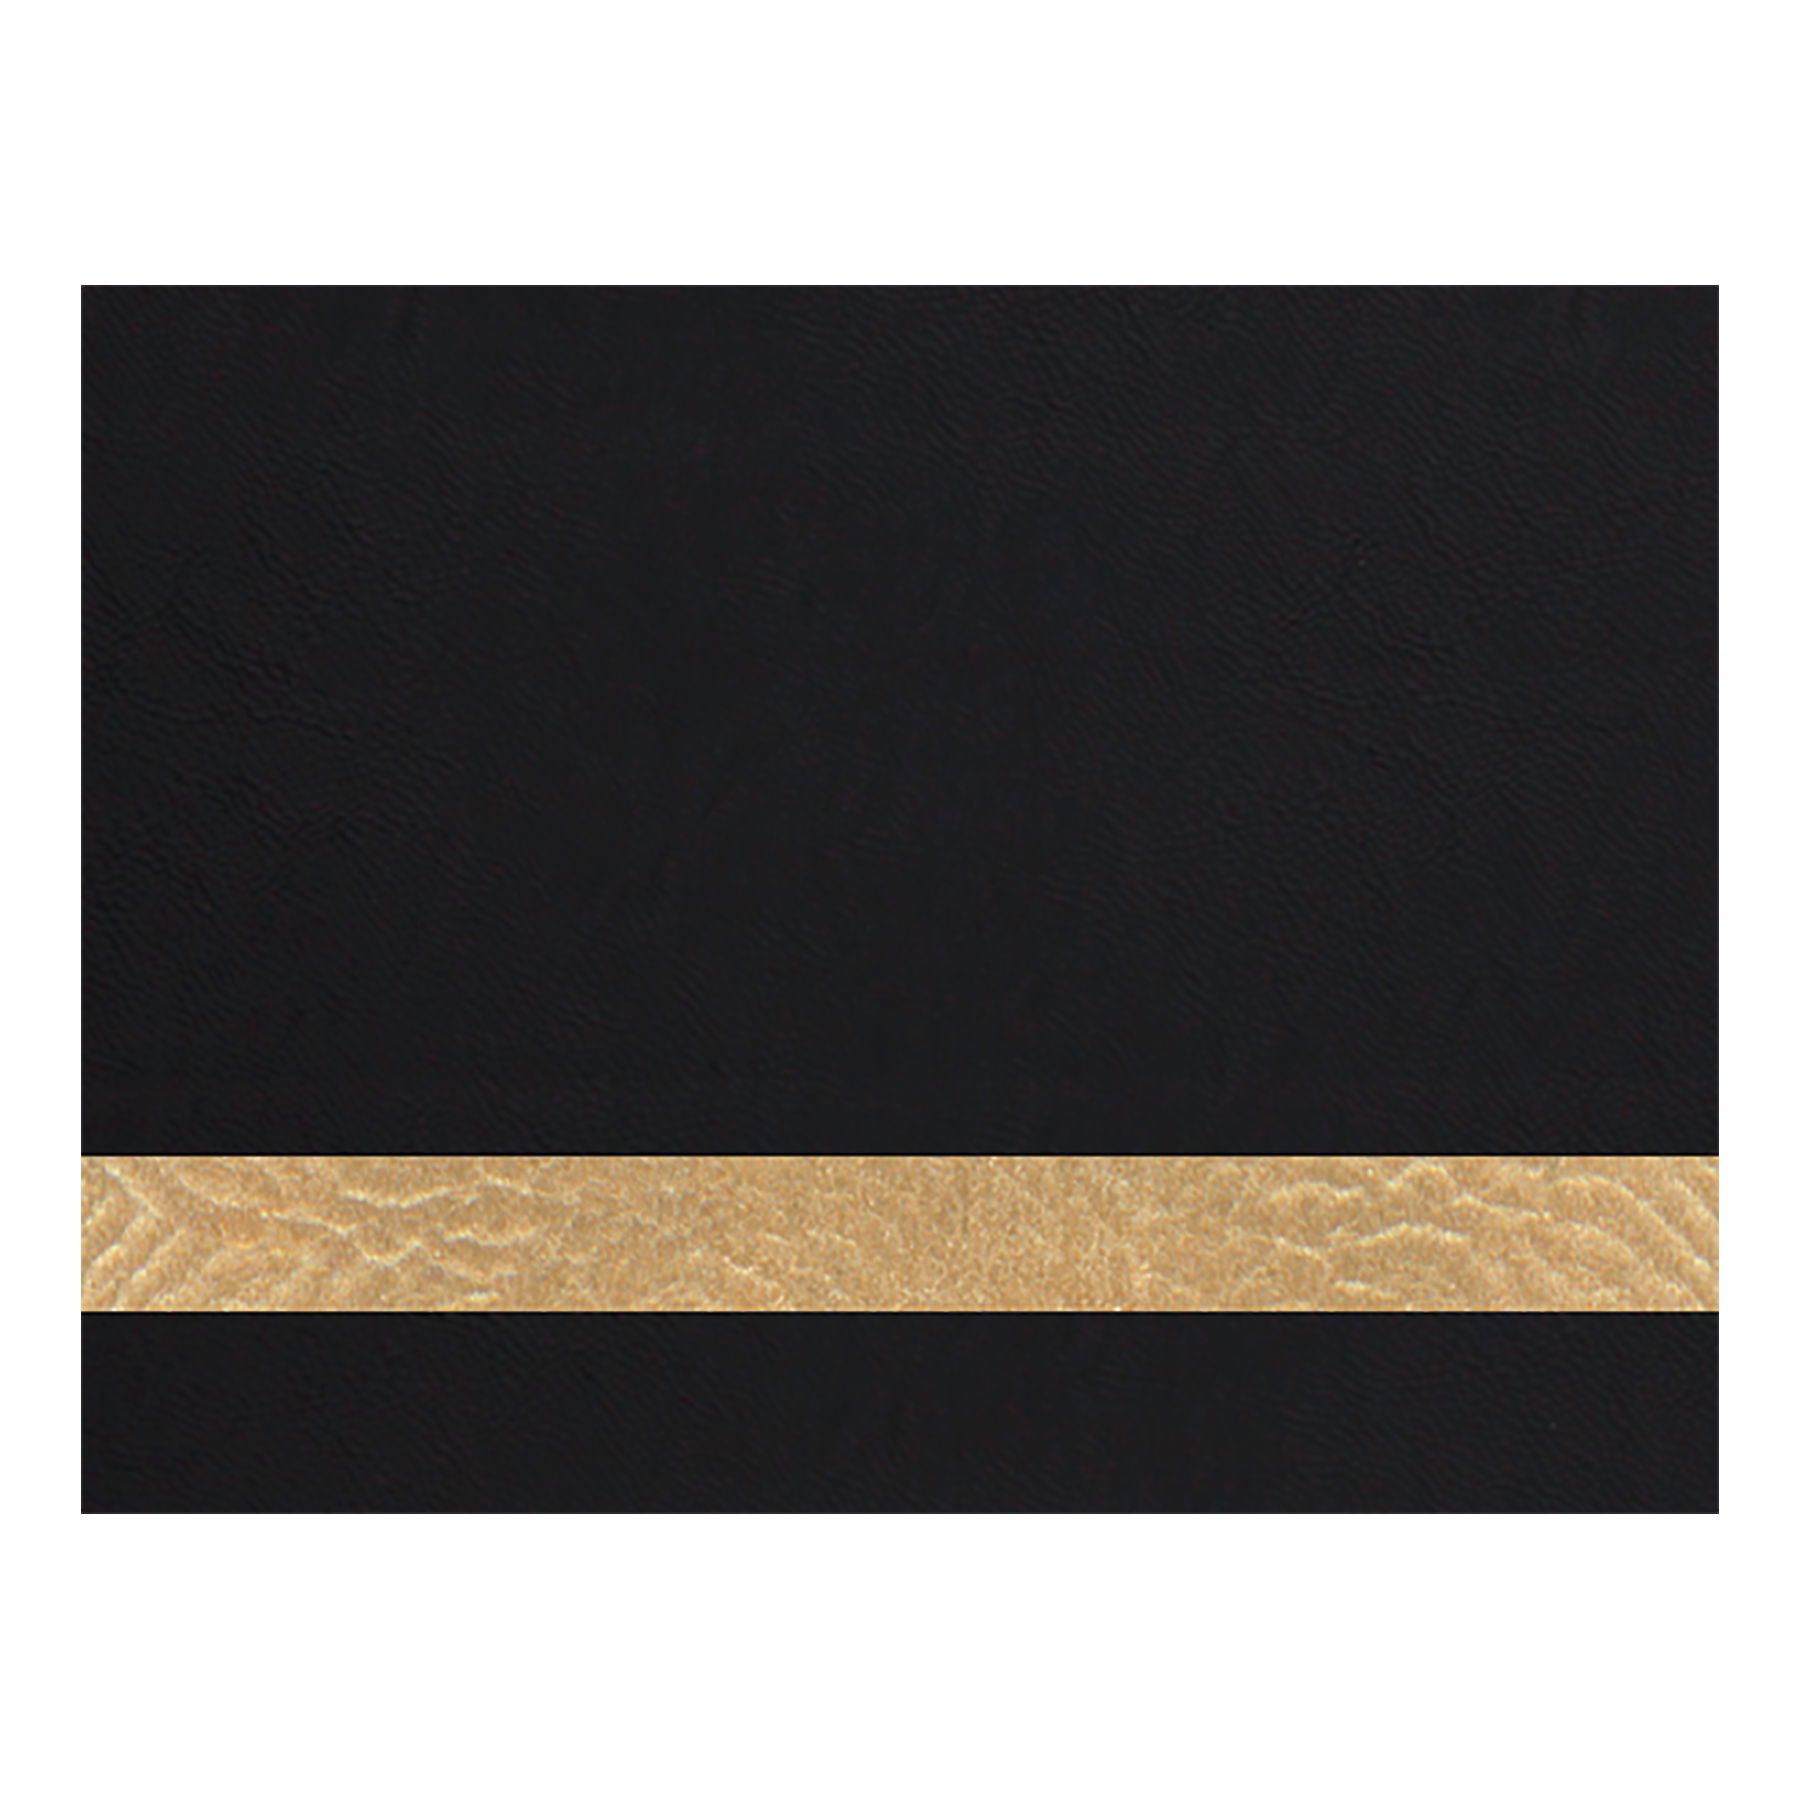 PRE-ORDER! Full Size Laserable Leatherette Sheet Stock, Omtech Laser Engravers (Available Jan. 2022) Engraving Supplies Craftworks NW 24x16 (24" x 16") Black/Gold 